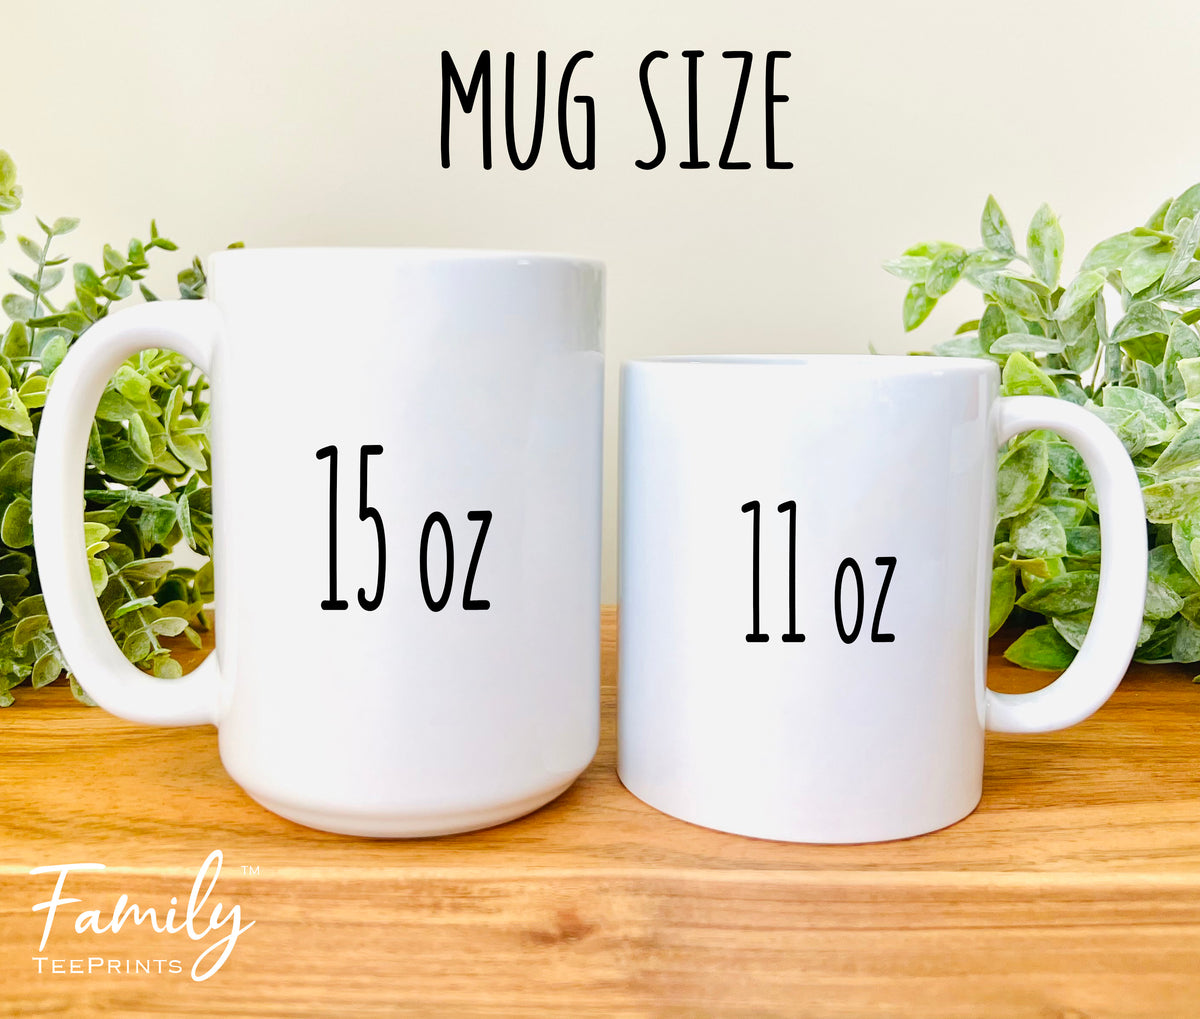 Being My Daughter-In-Law Is Really The Only Gift You Need - Coffee Mug - Funny Daughter-In-Law Gift - Daughter-In-Law Mug - familyteeprints